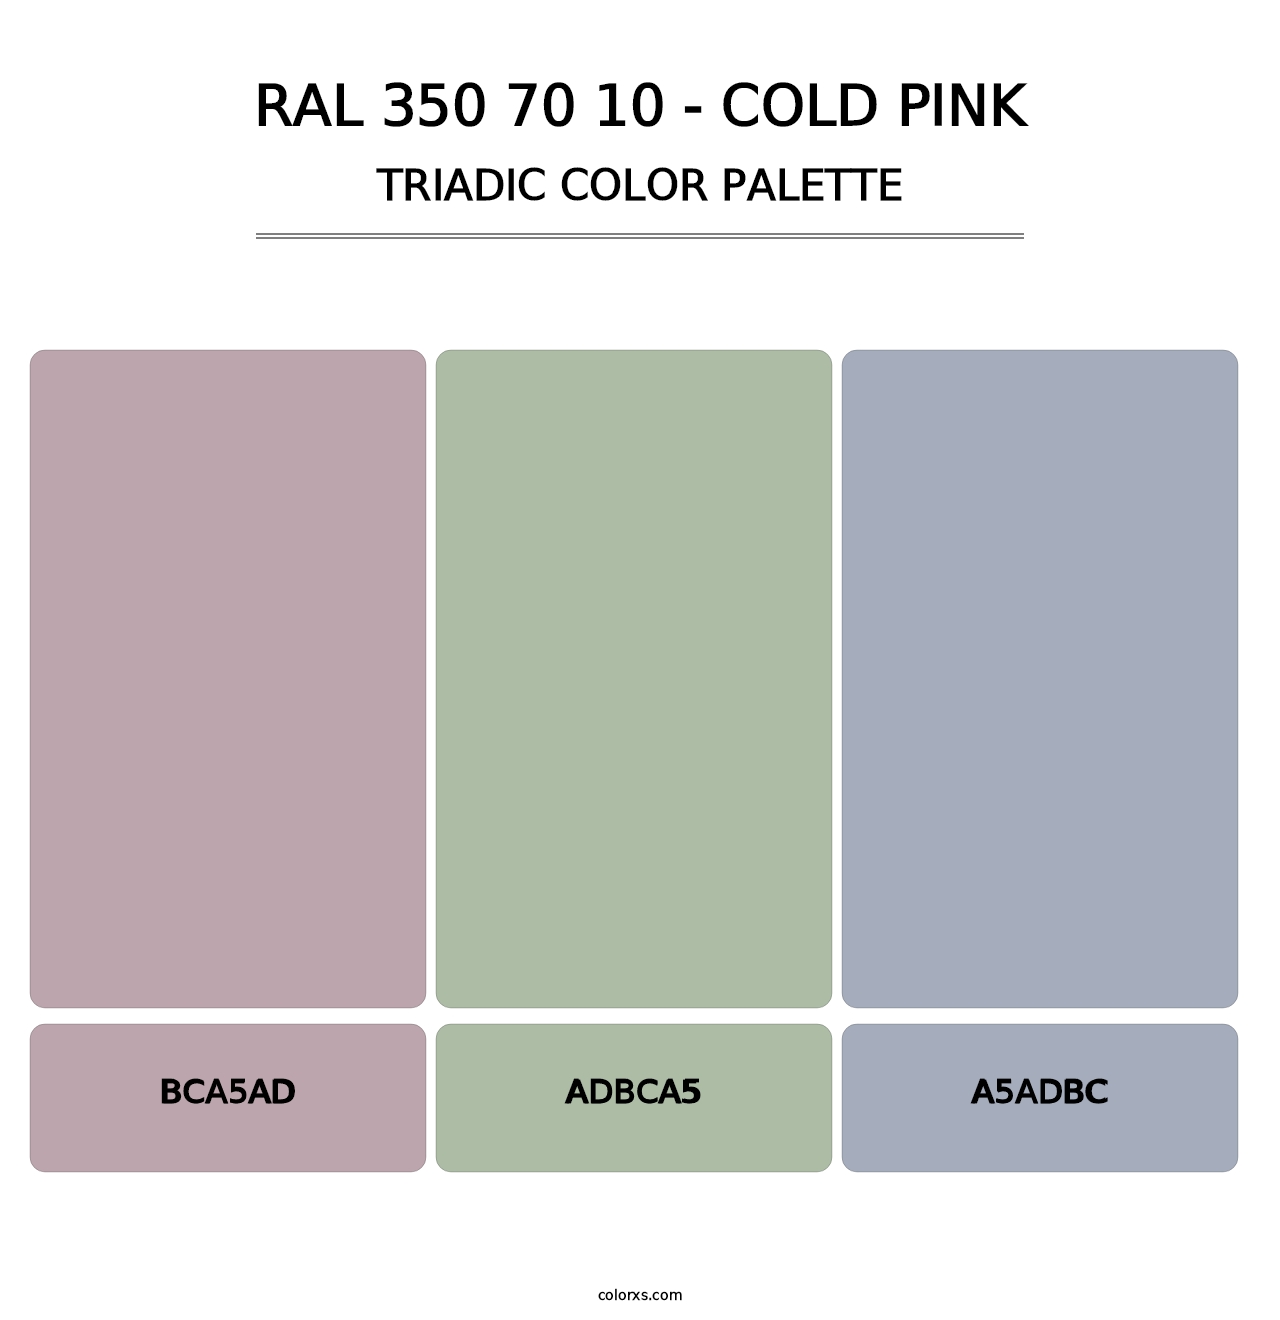 RAL 350 70 10 - Cold Pink - Triadic Color Palette